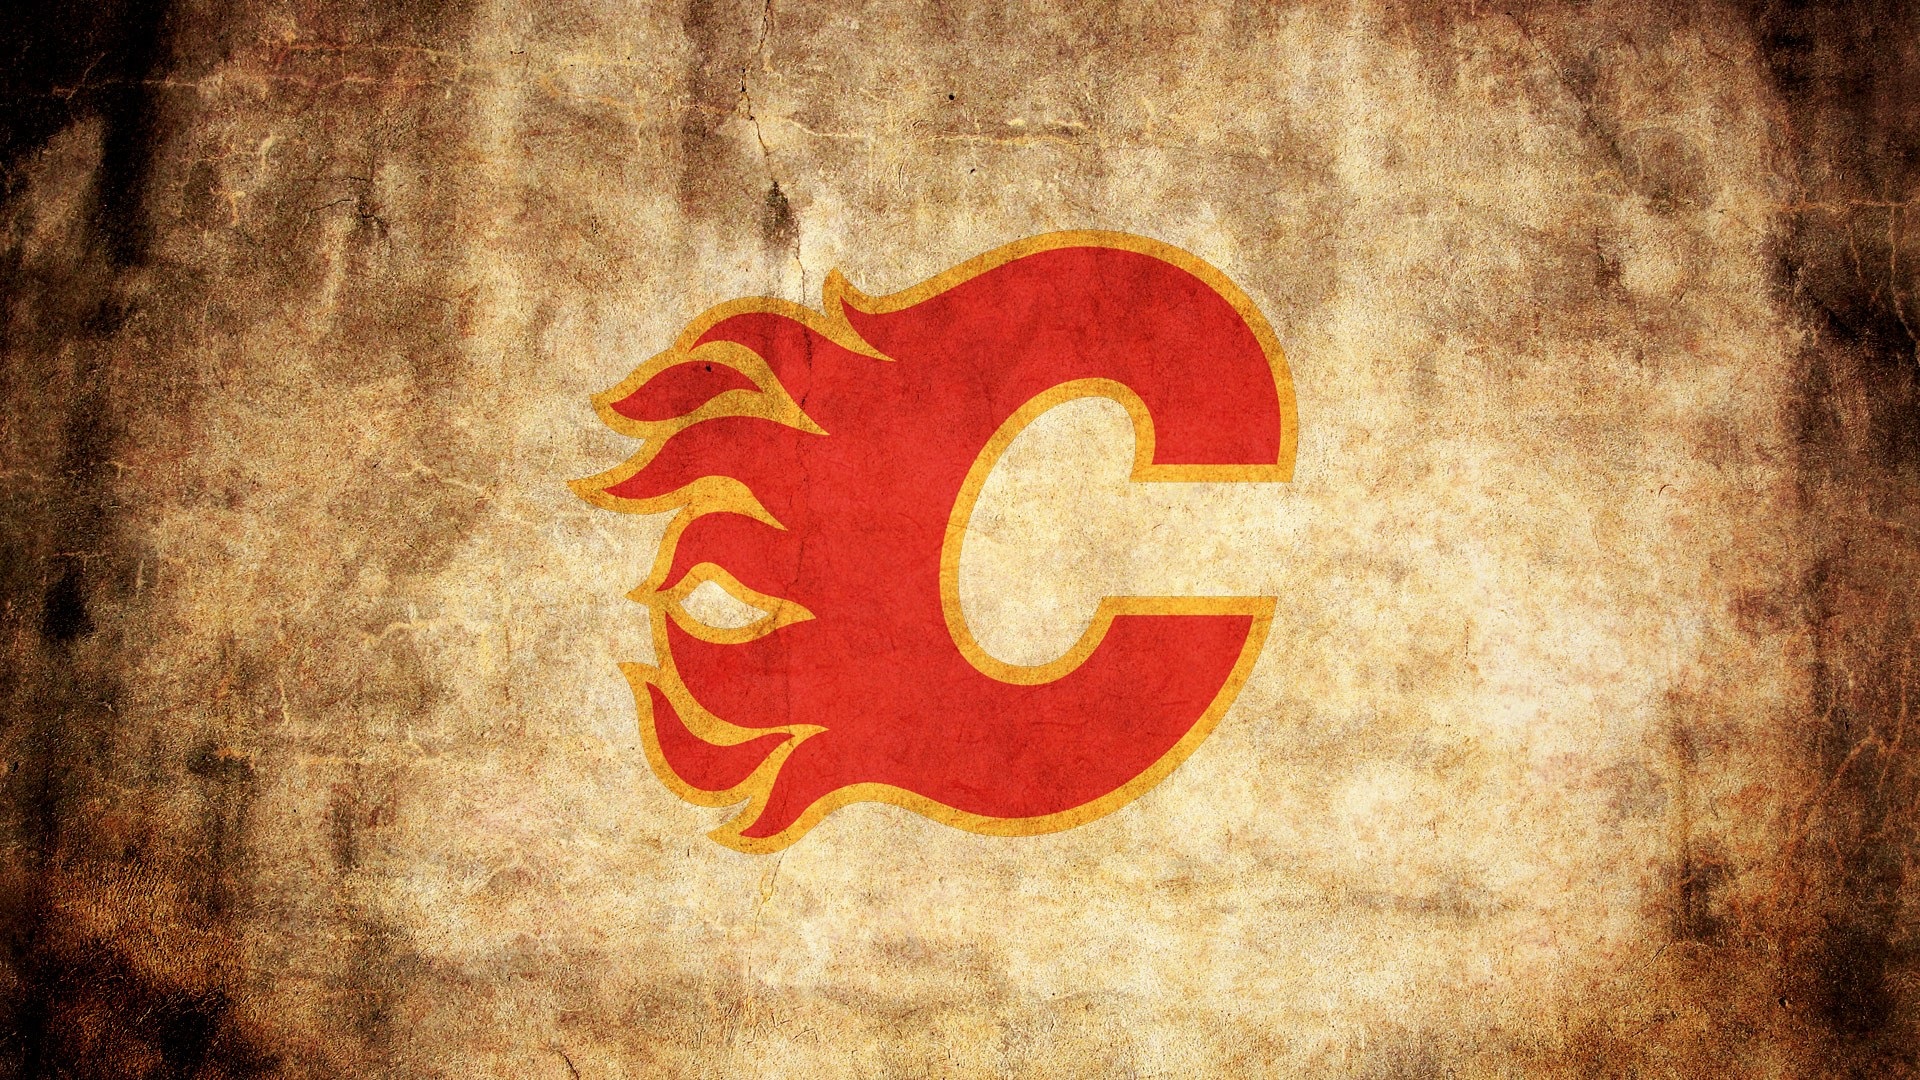 Calgary Flames HD Wallpaper Full HD Pictures